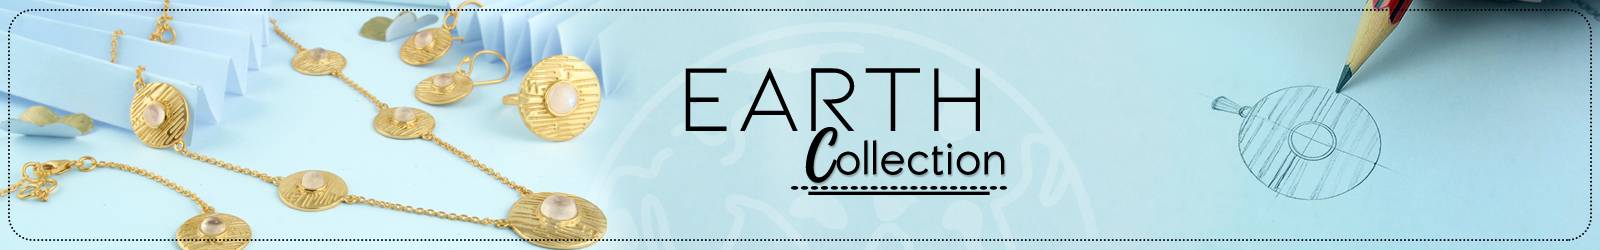 Online Wholesale Earth Collection Silver Jewelry Manufacturer in Jaipur